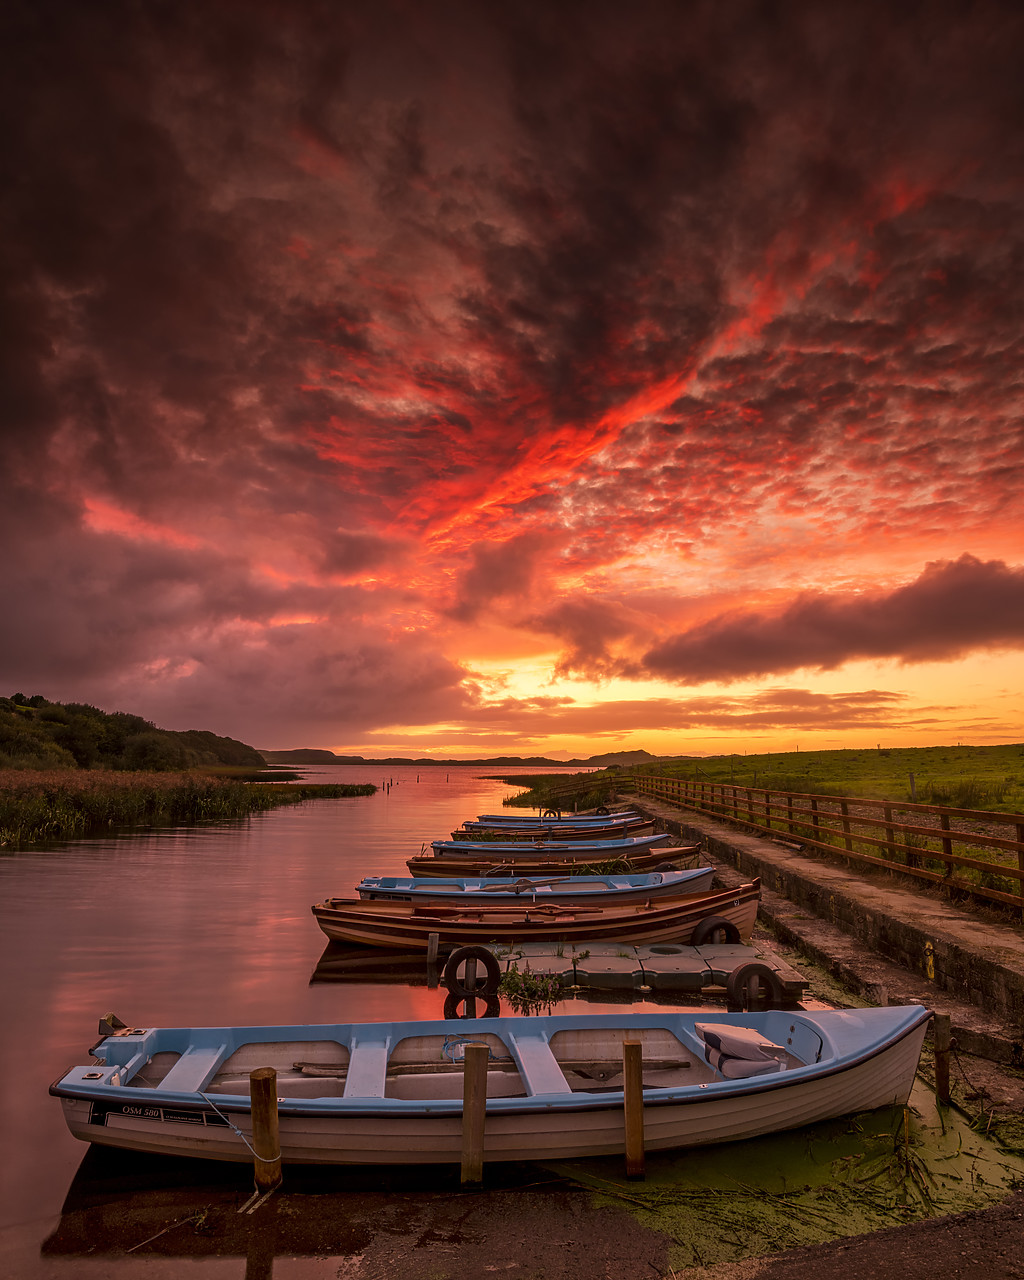 #190594-2 - Boats at Sunset, Co. Donegal, Ireland